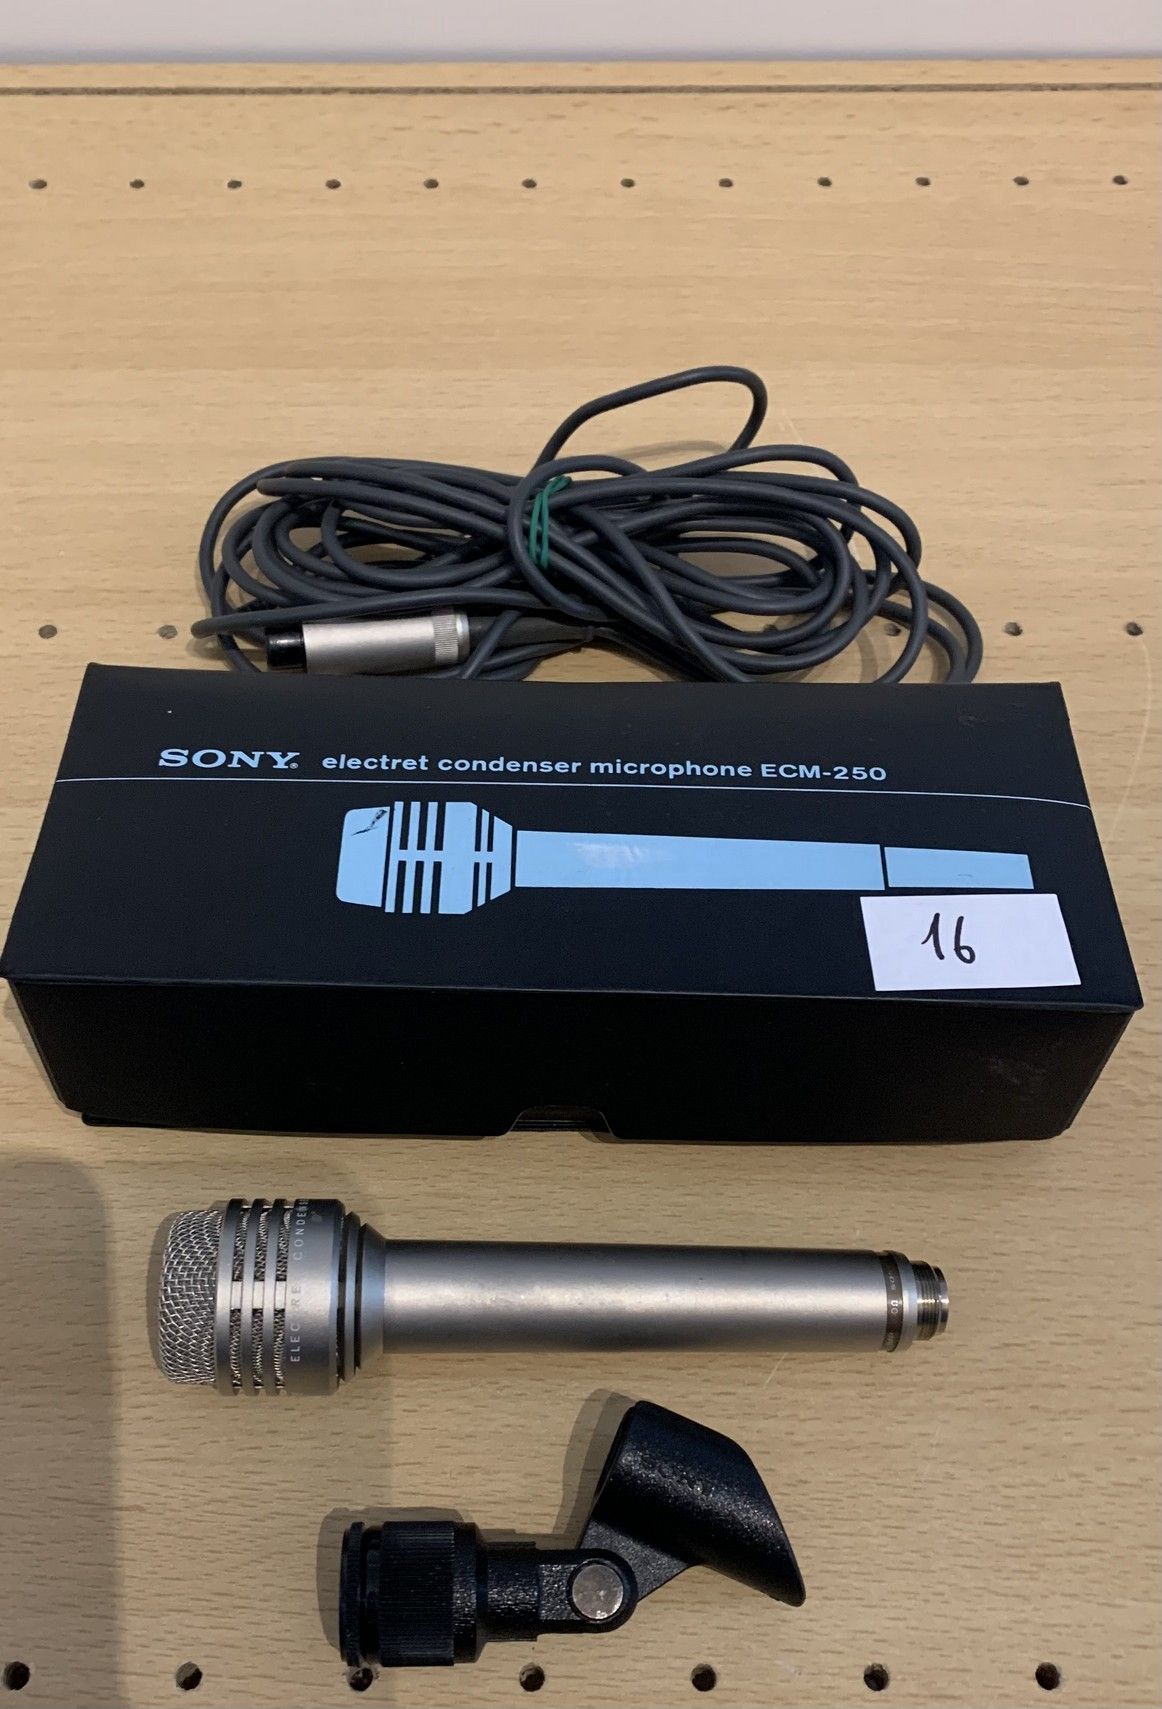 Null Condenser microphone/electret, SONY, ECM 250
Good cosmetic condition, untes&hellip;